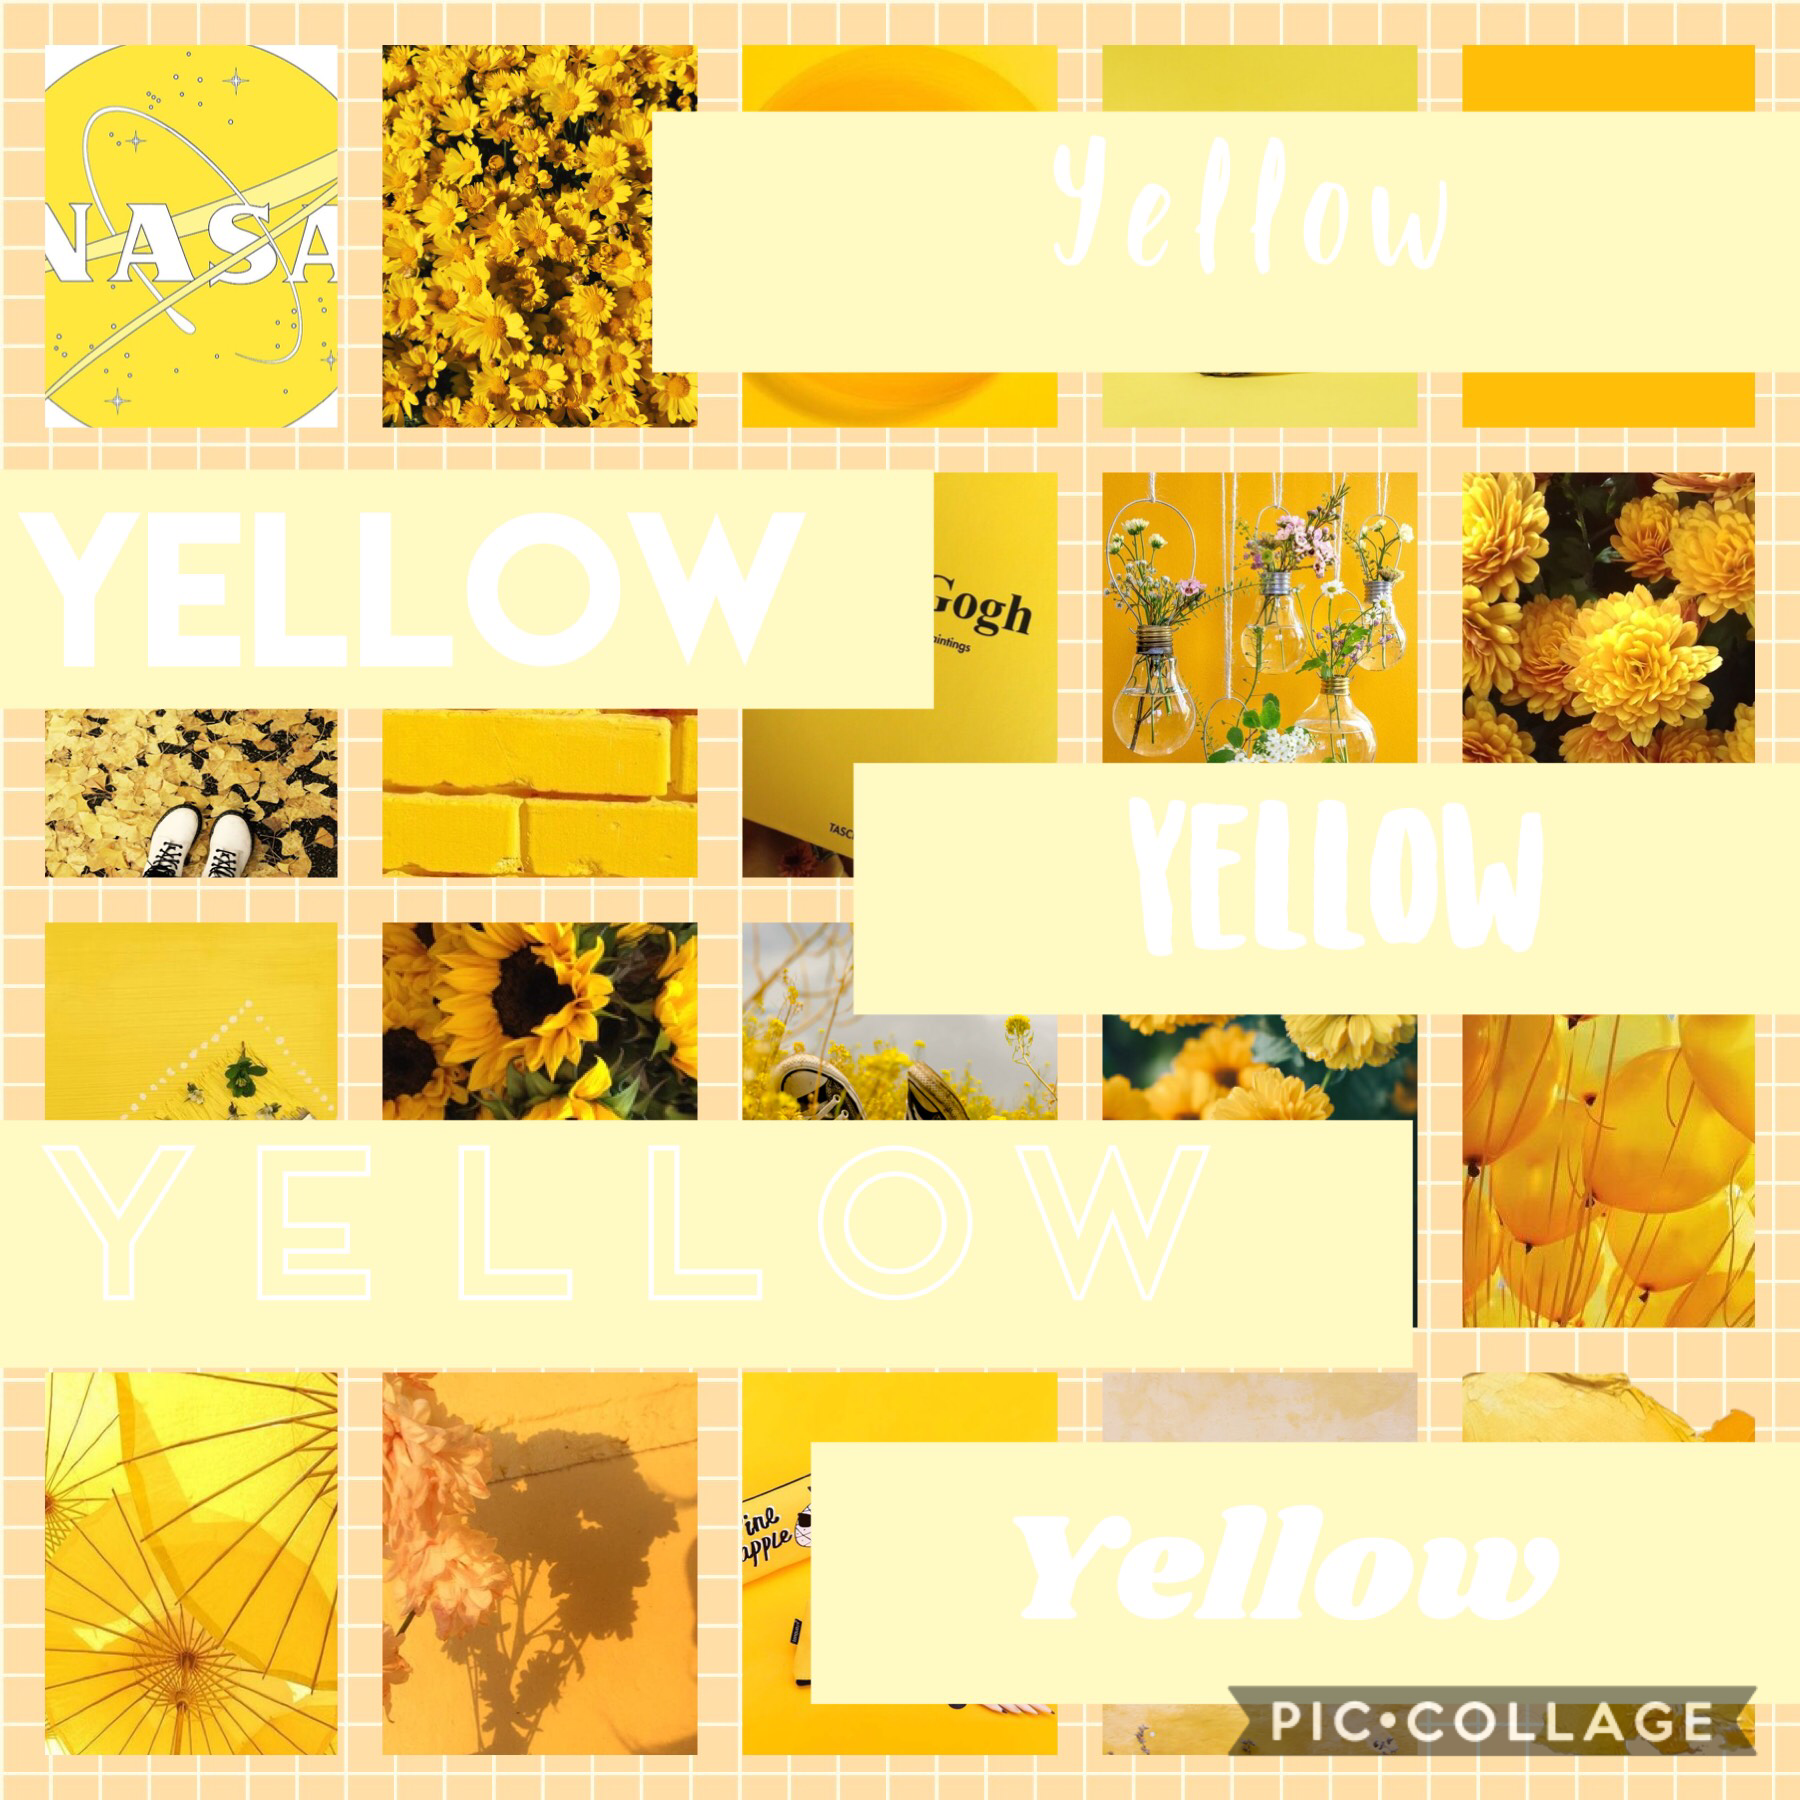 I’m obsessed w/ yellow right now! Comment yellow emojis!🌼🌻⭐️☀️🛵